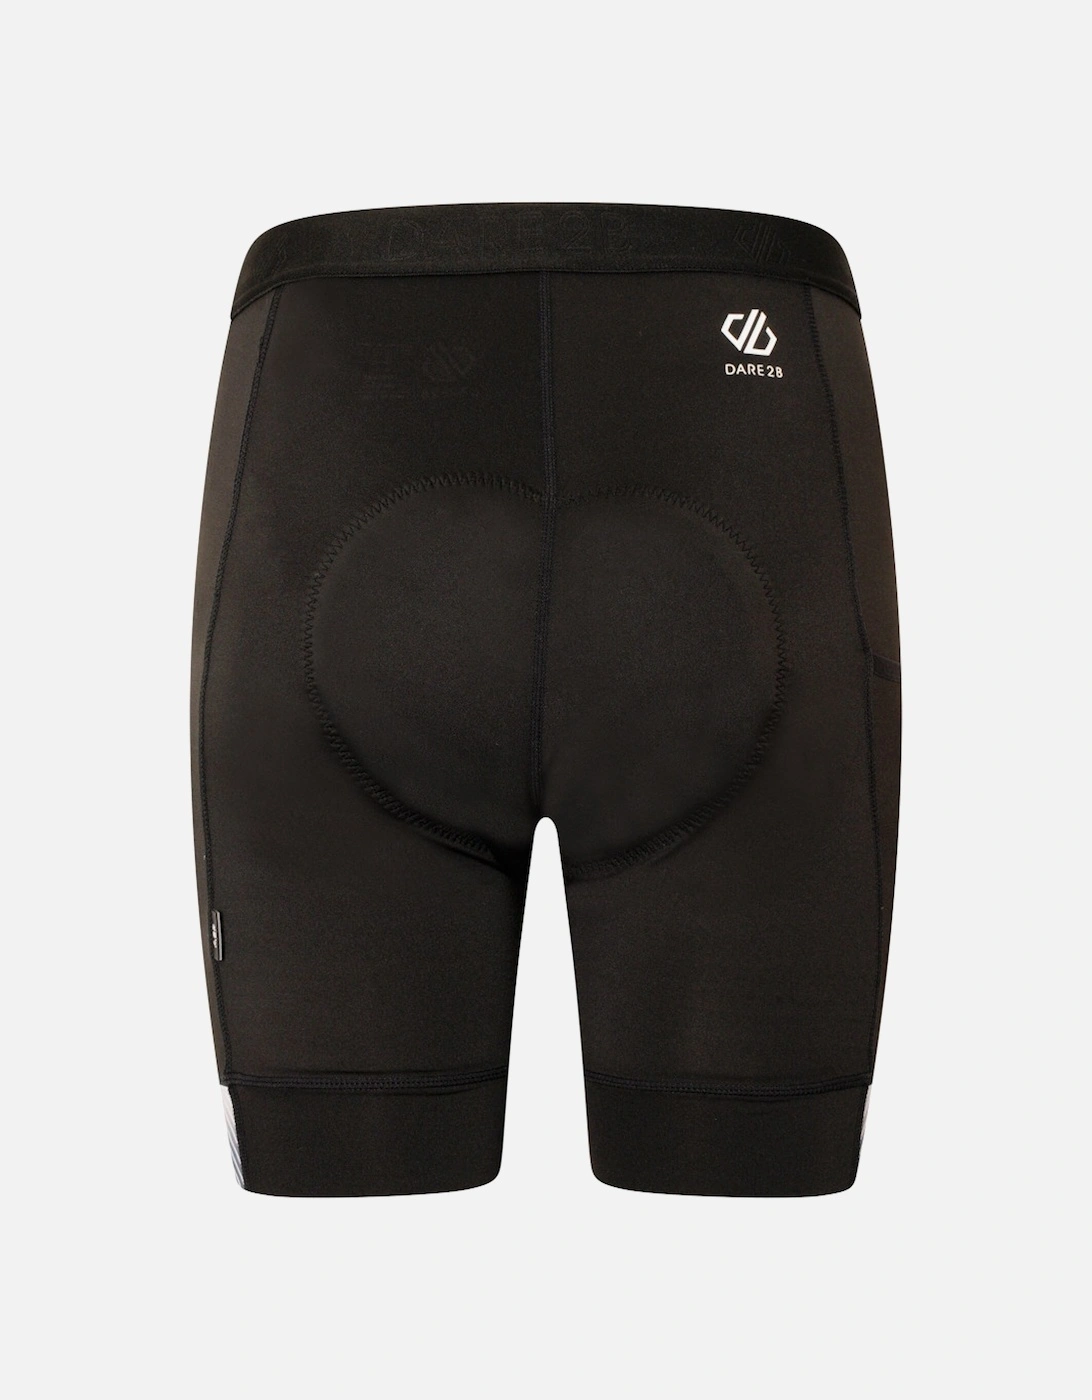 Womens AEP Prompt Wicking Athletic Shorts